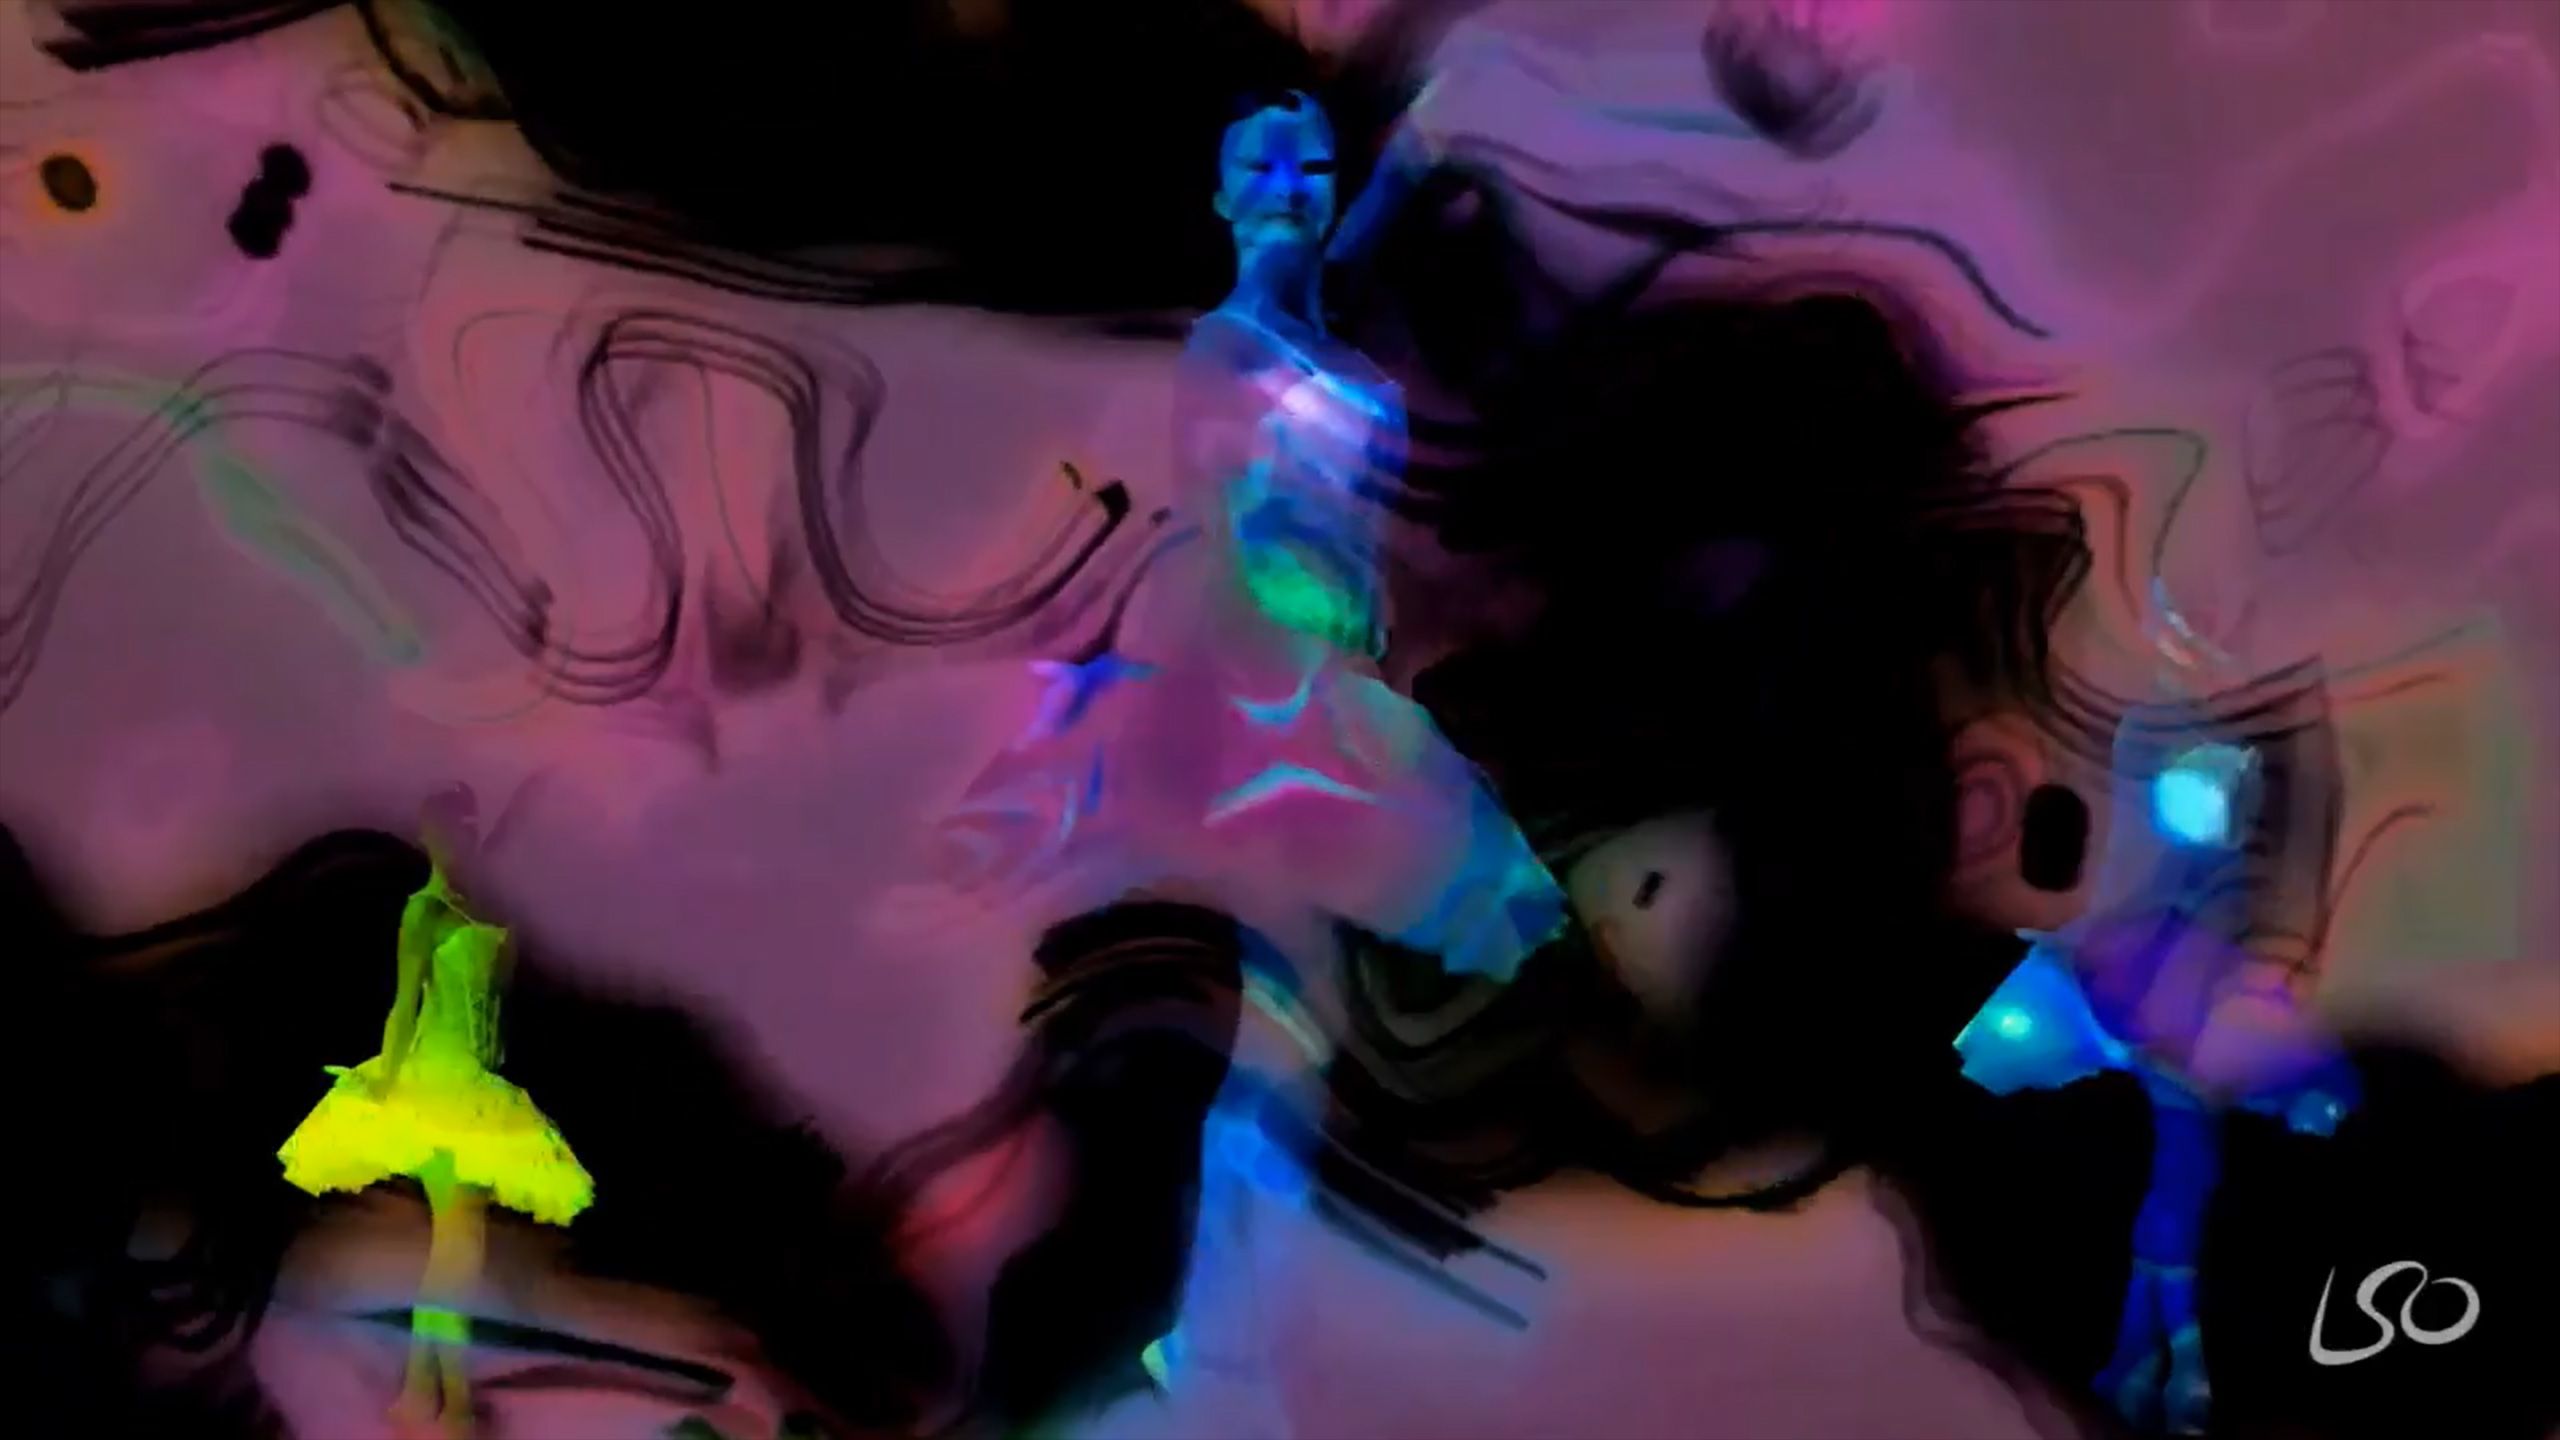 Artwork from the DreamCity music video: neon-hued ballet dancers surrounded by swirling pink